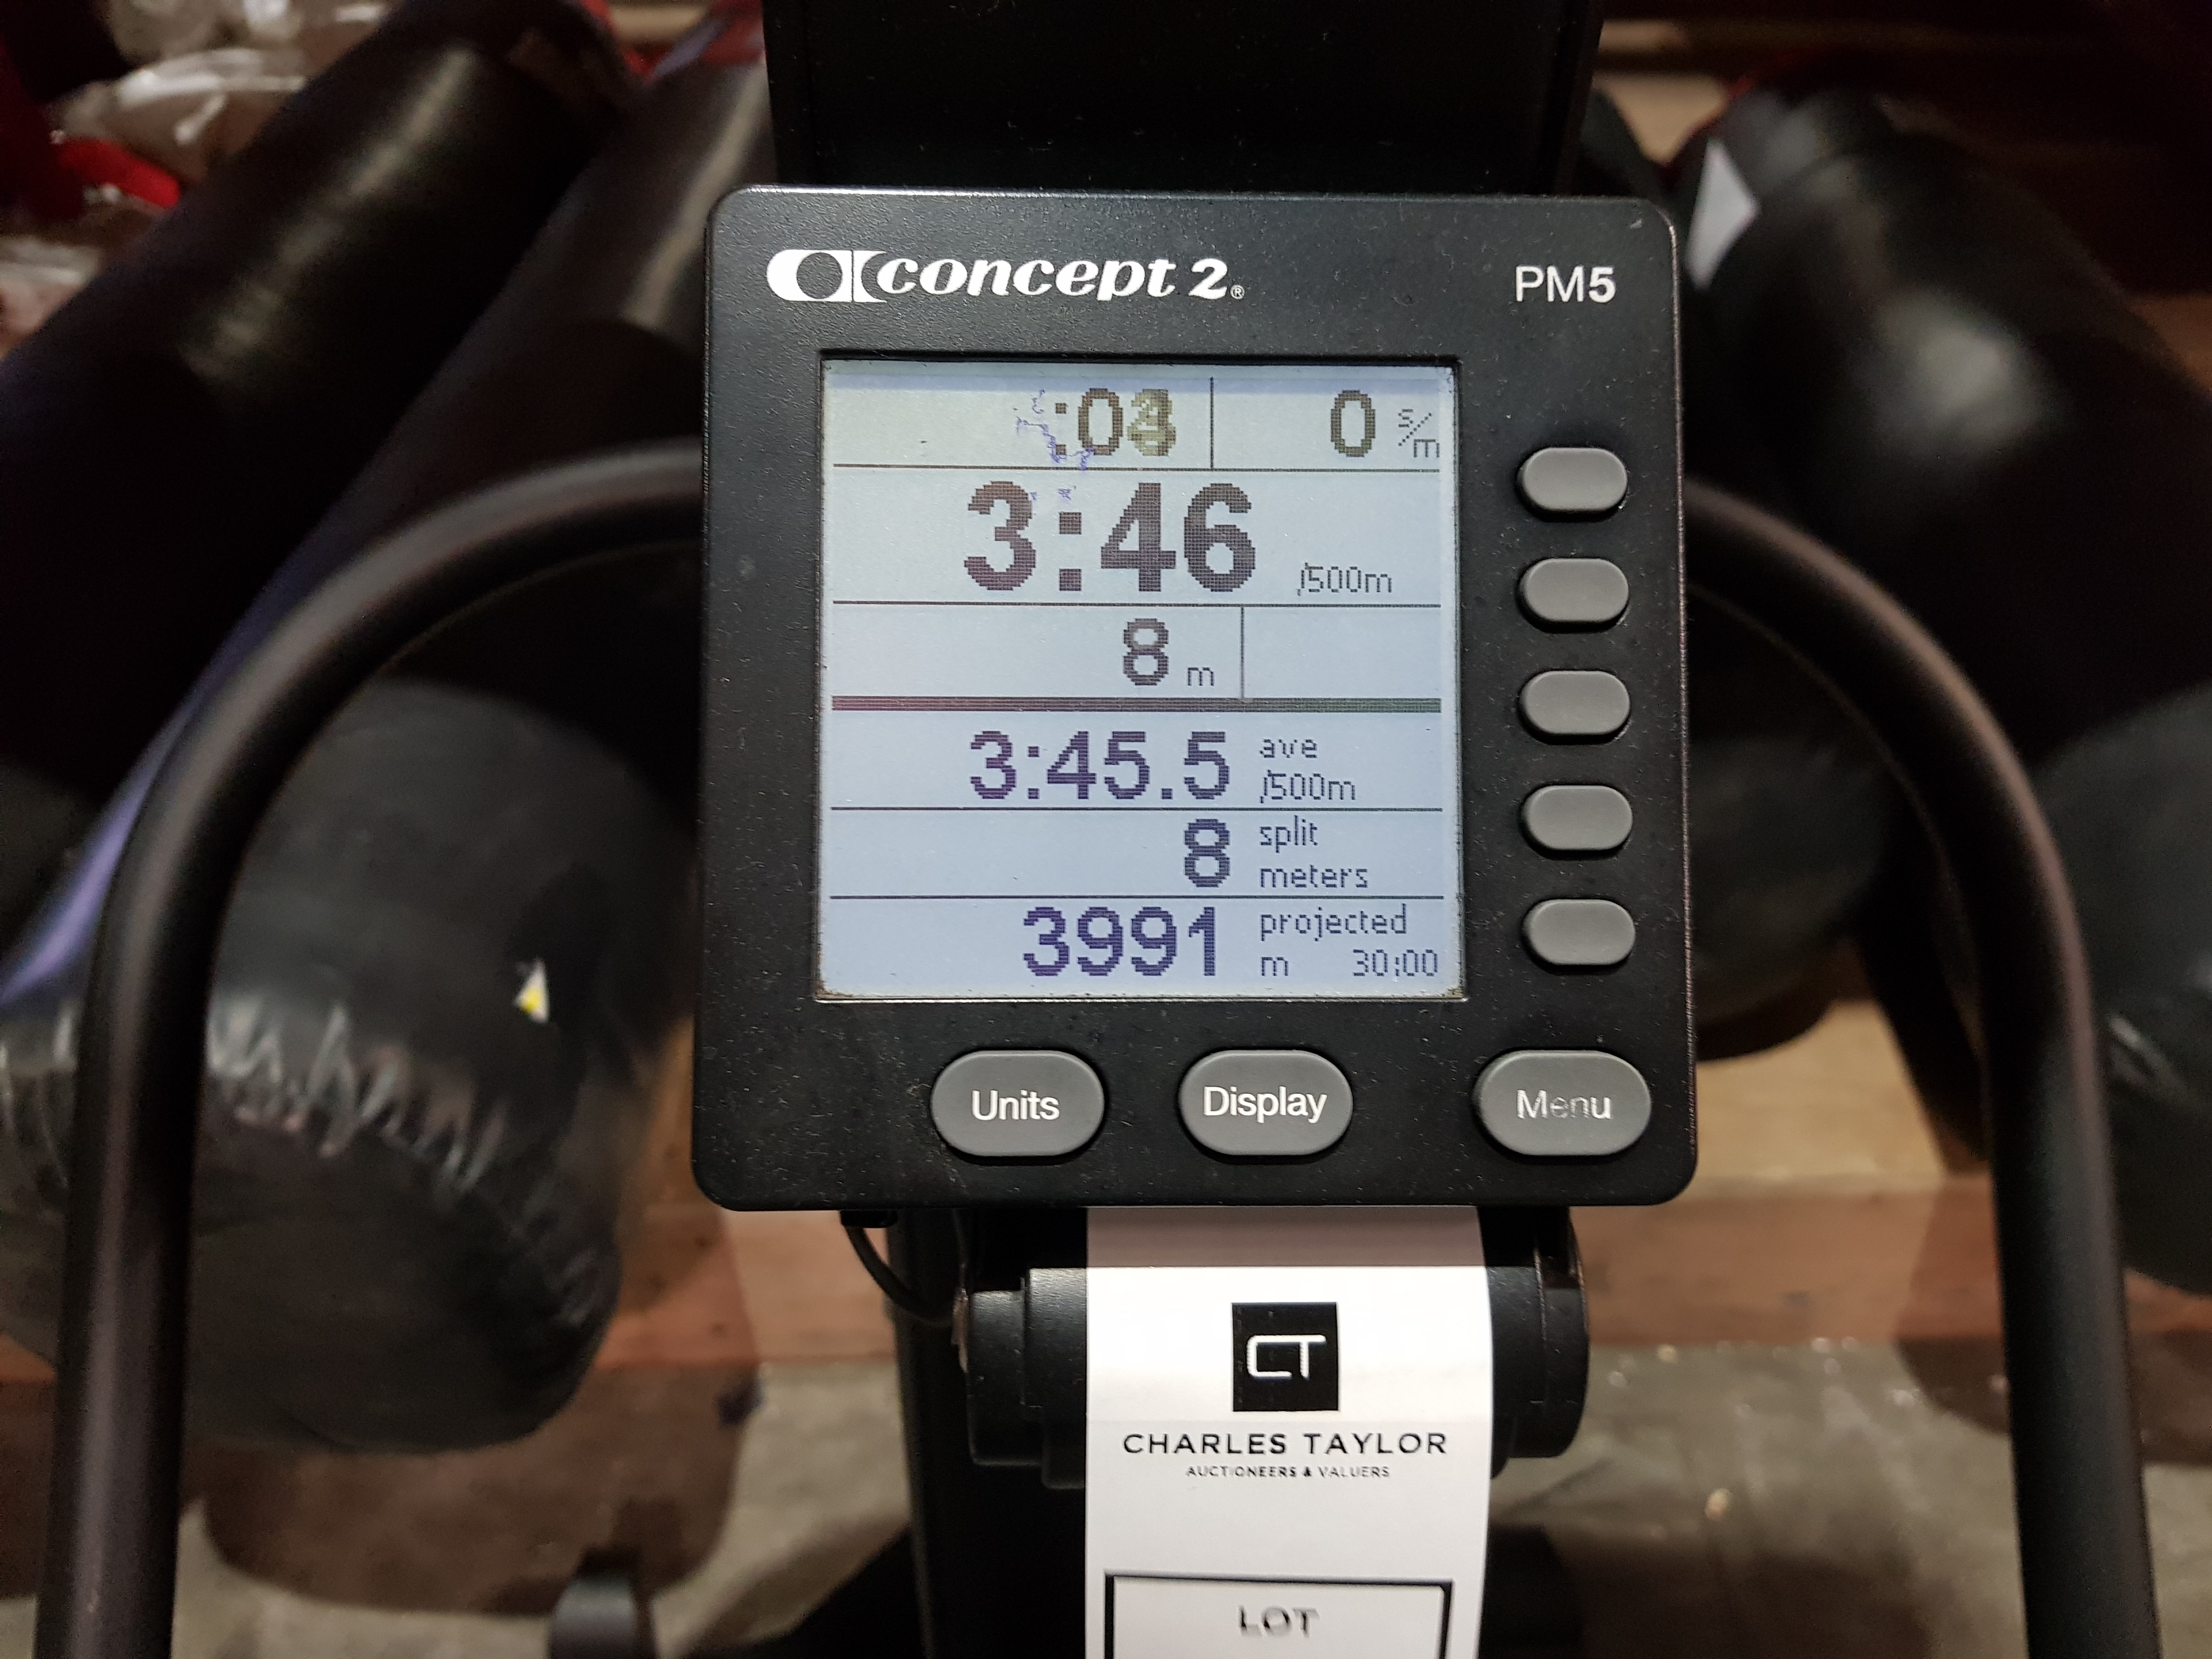 1 X CONCEPT 2 SKI ERG - FREESTANDING WITH BASE - PM5 PERFORMANCE MONITOR - PLYWHEEL AND DAMPNER - Image 2 of 2